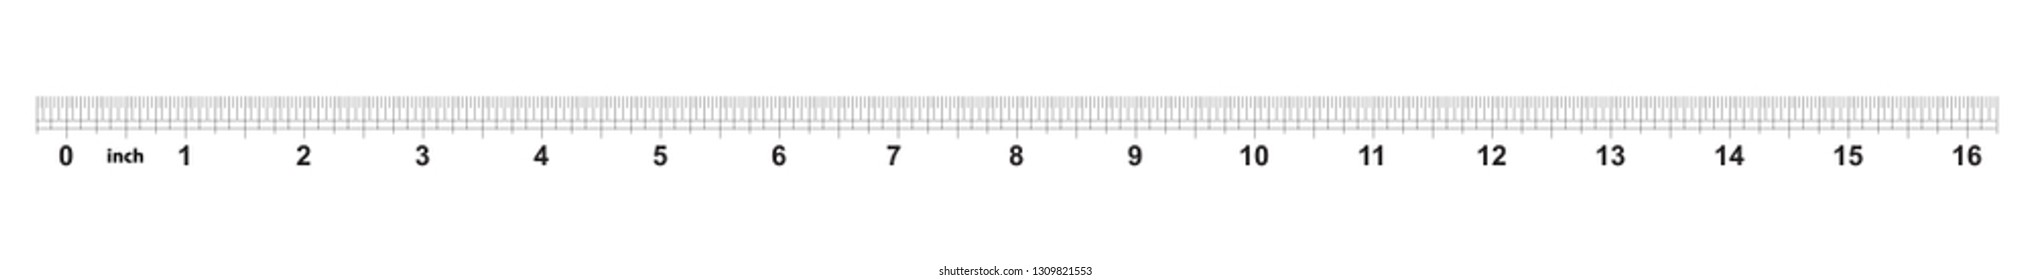 similar images stock photos vectors of ruler 12 inches imperial ruler 12 inches metric precise measuring tool calibration grid 1317905204 shutterstock